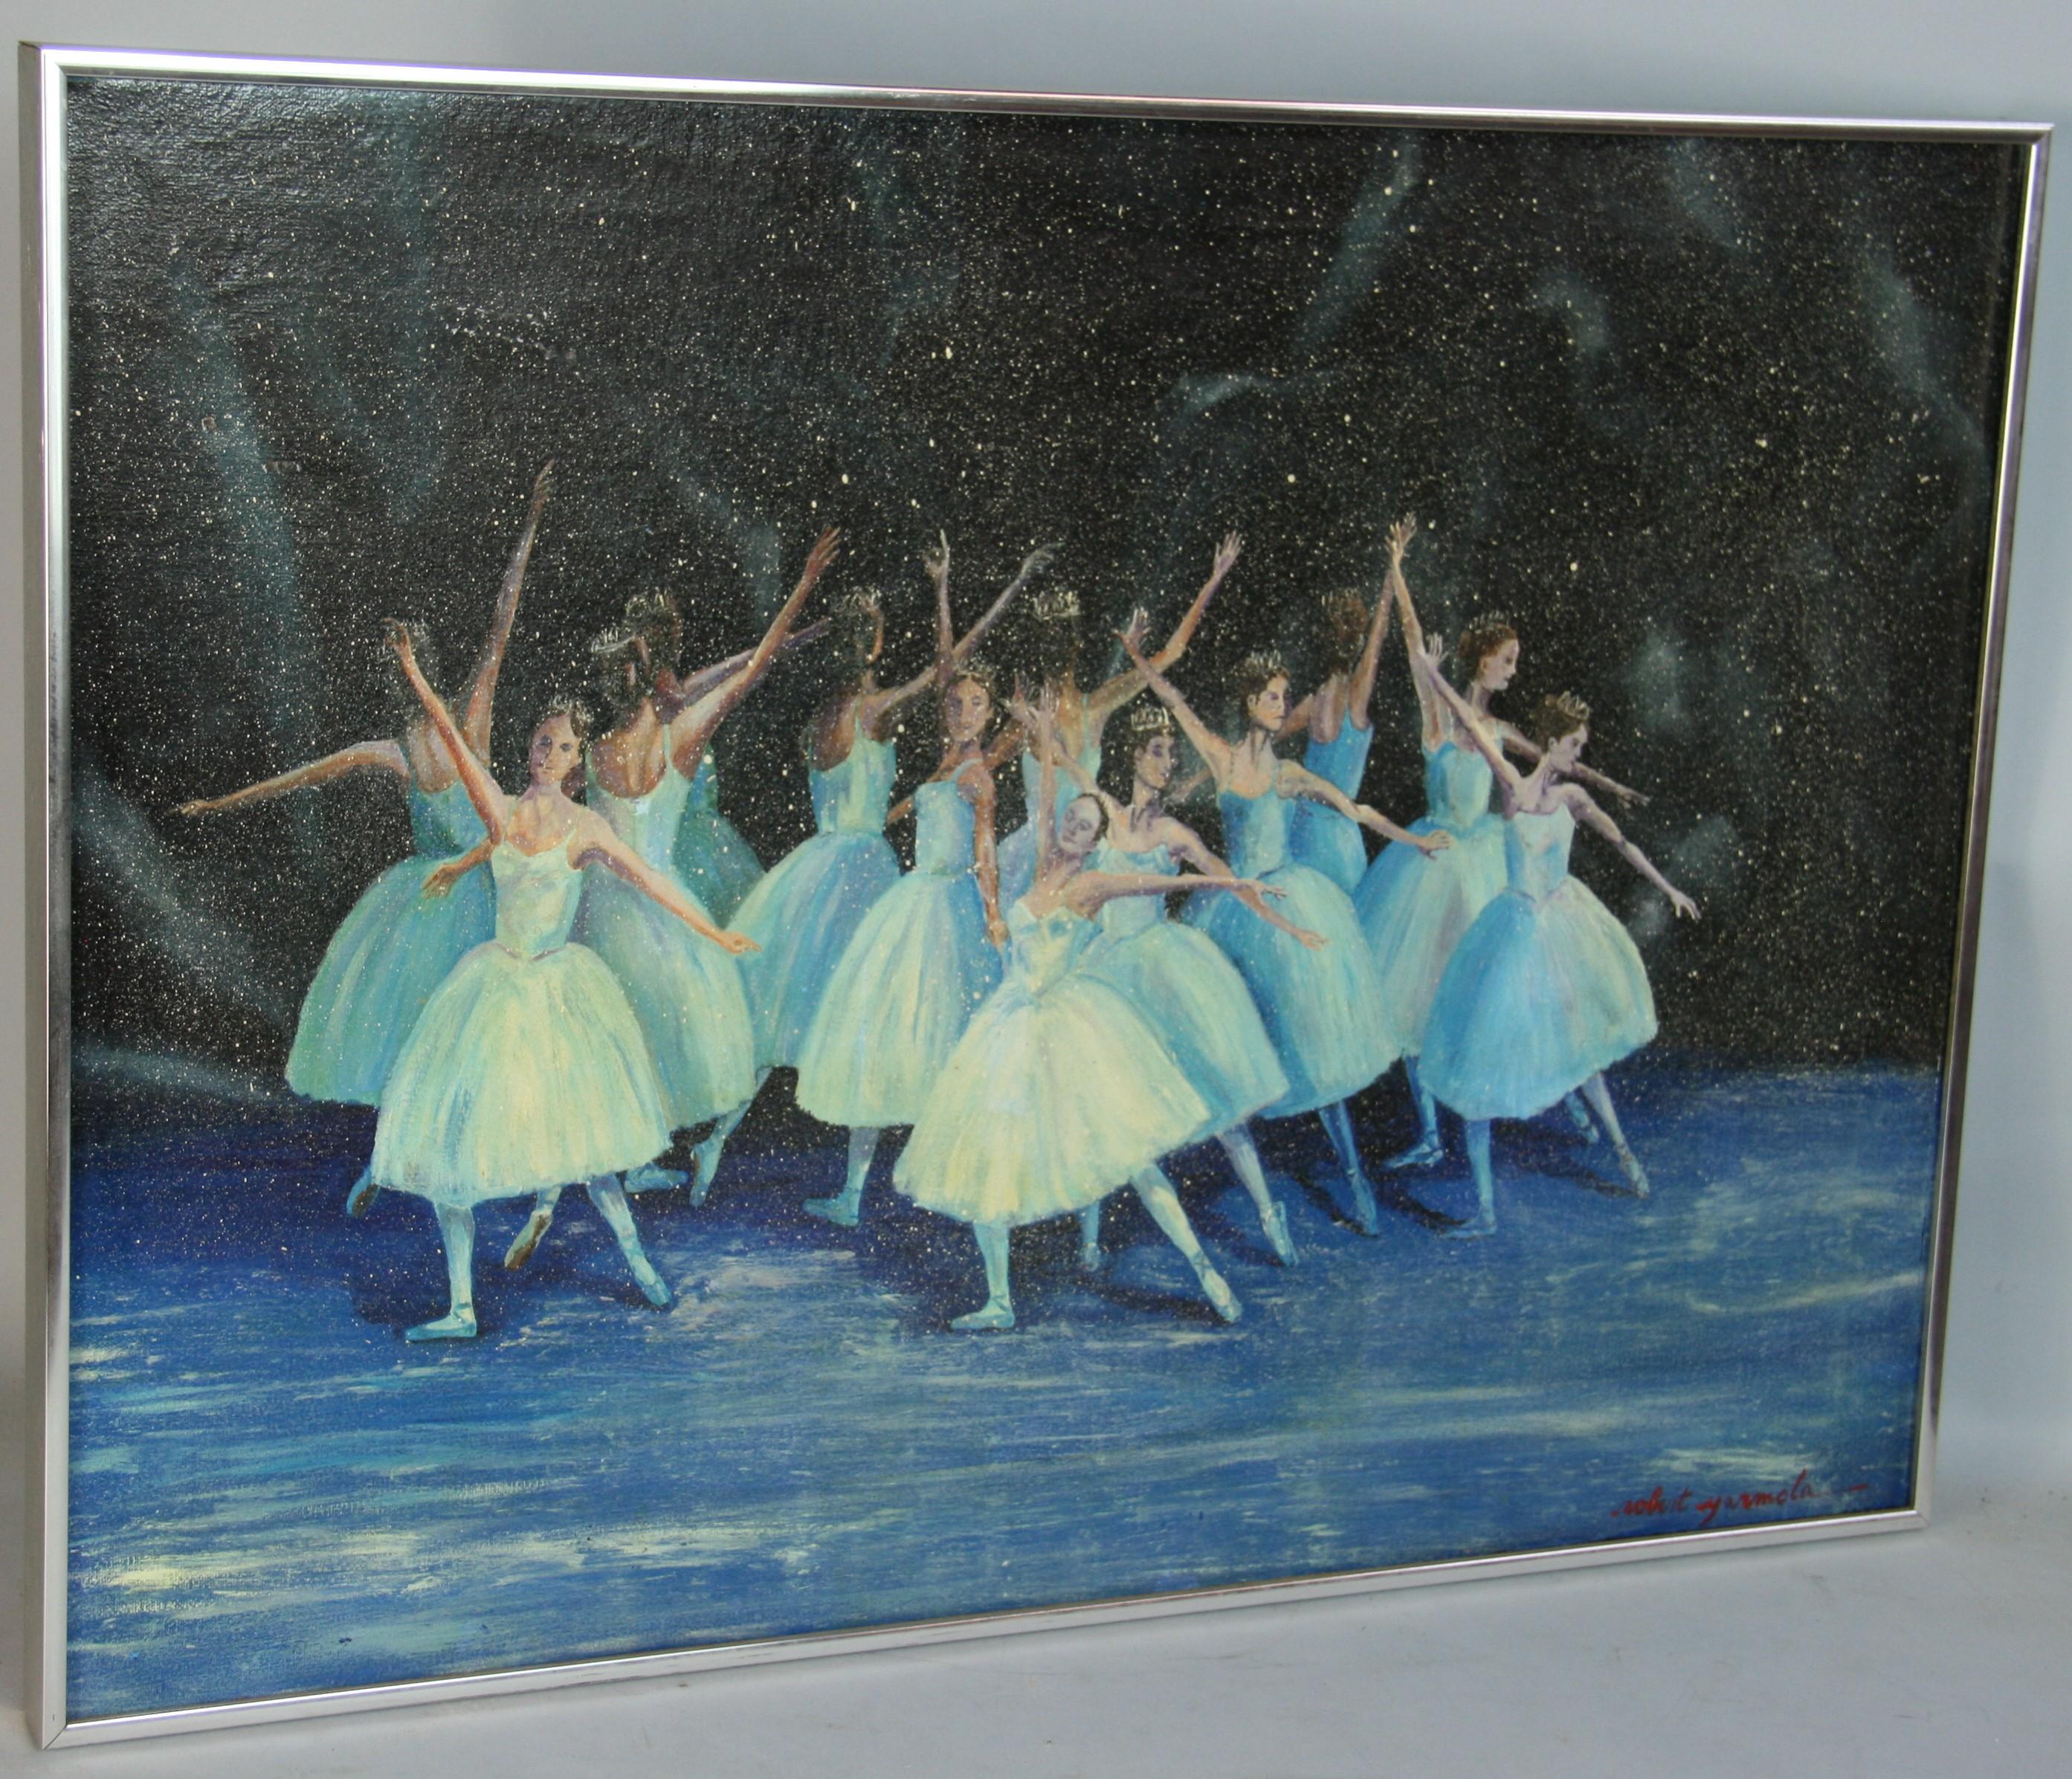 Vintage Impressionist Ballet Performance by Robert Yarmola - Painting by Unknown